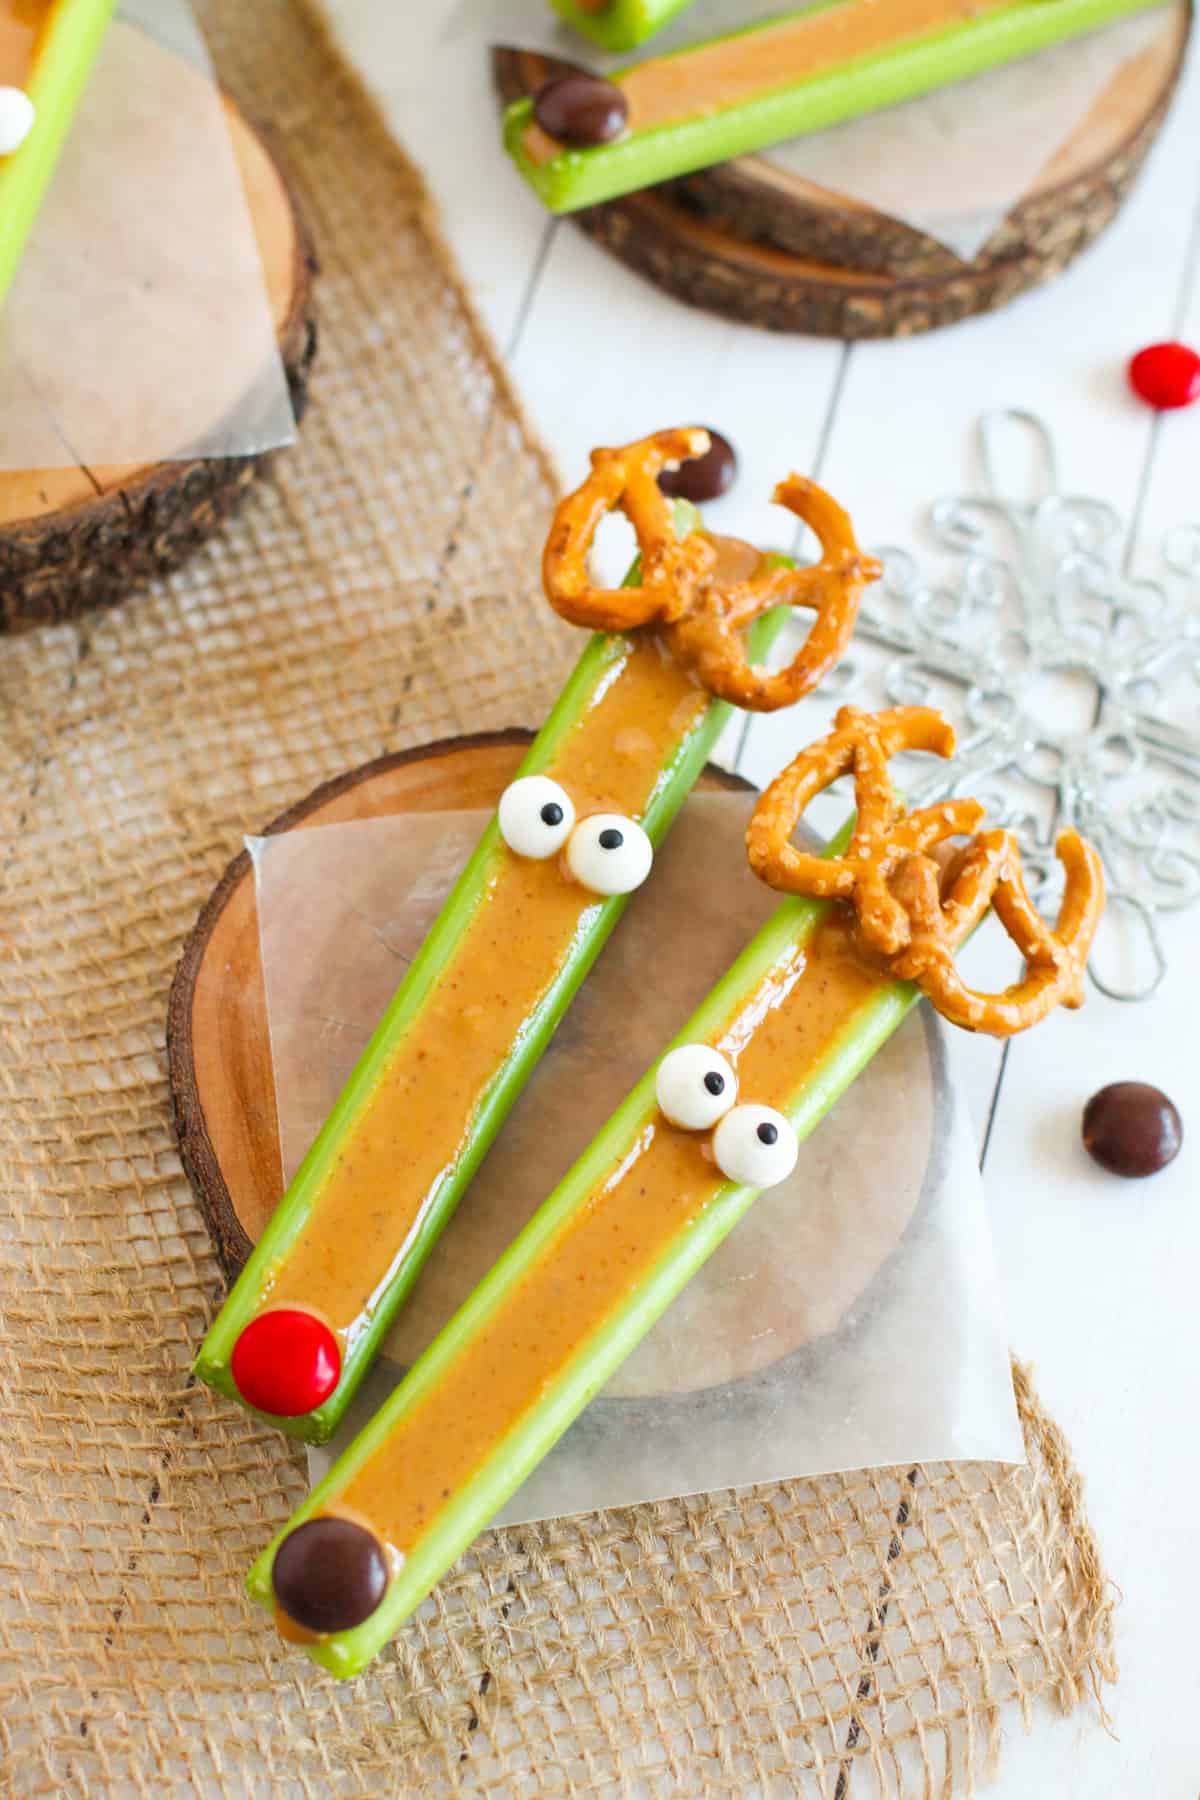 Two reindeer celery sticks, one with red nose like Rudolph and one with a brown nose.